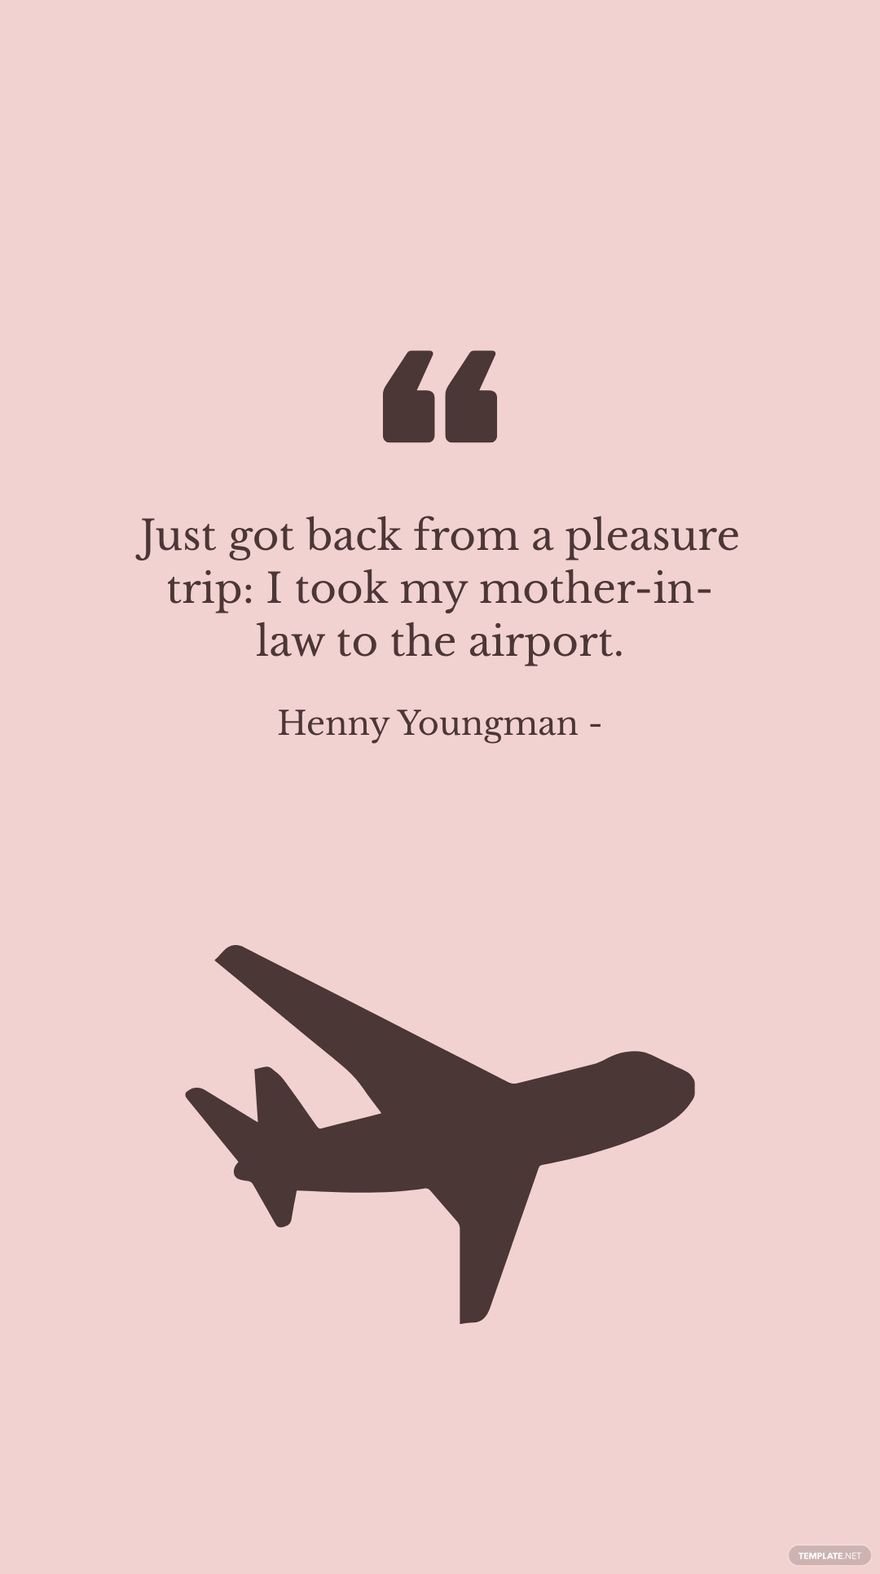 Henny Youngman - Just got back from a pleasure trip: I took my mother-in-law to the airport.